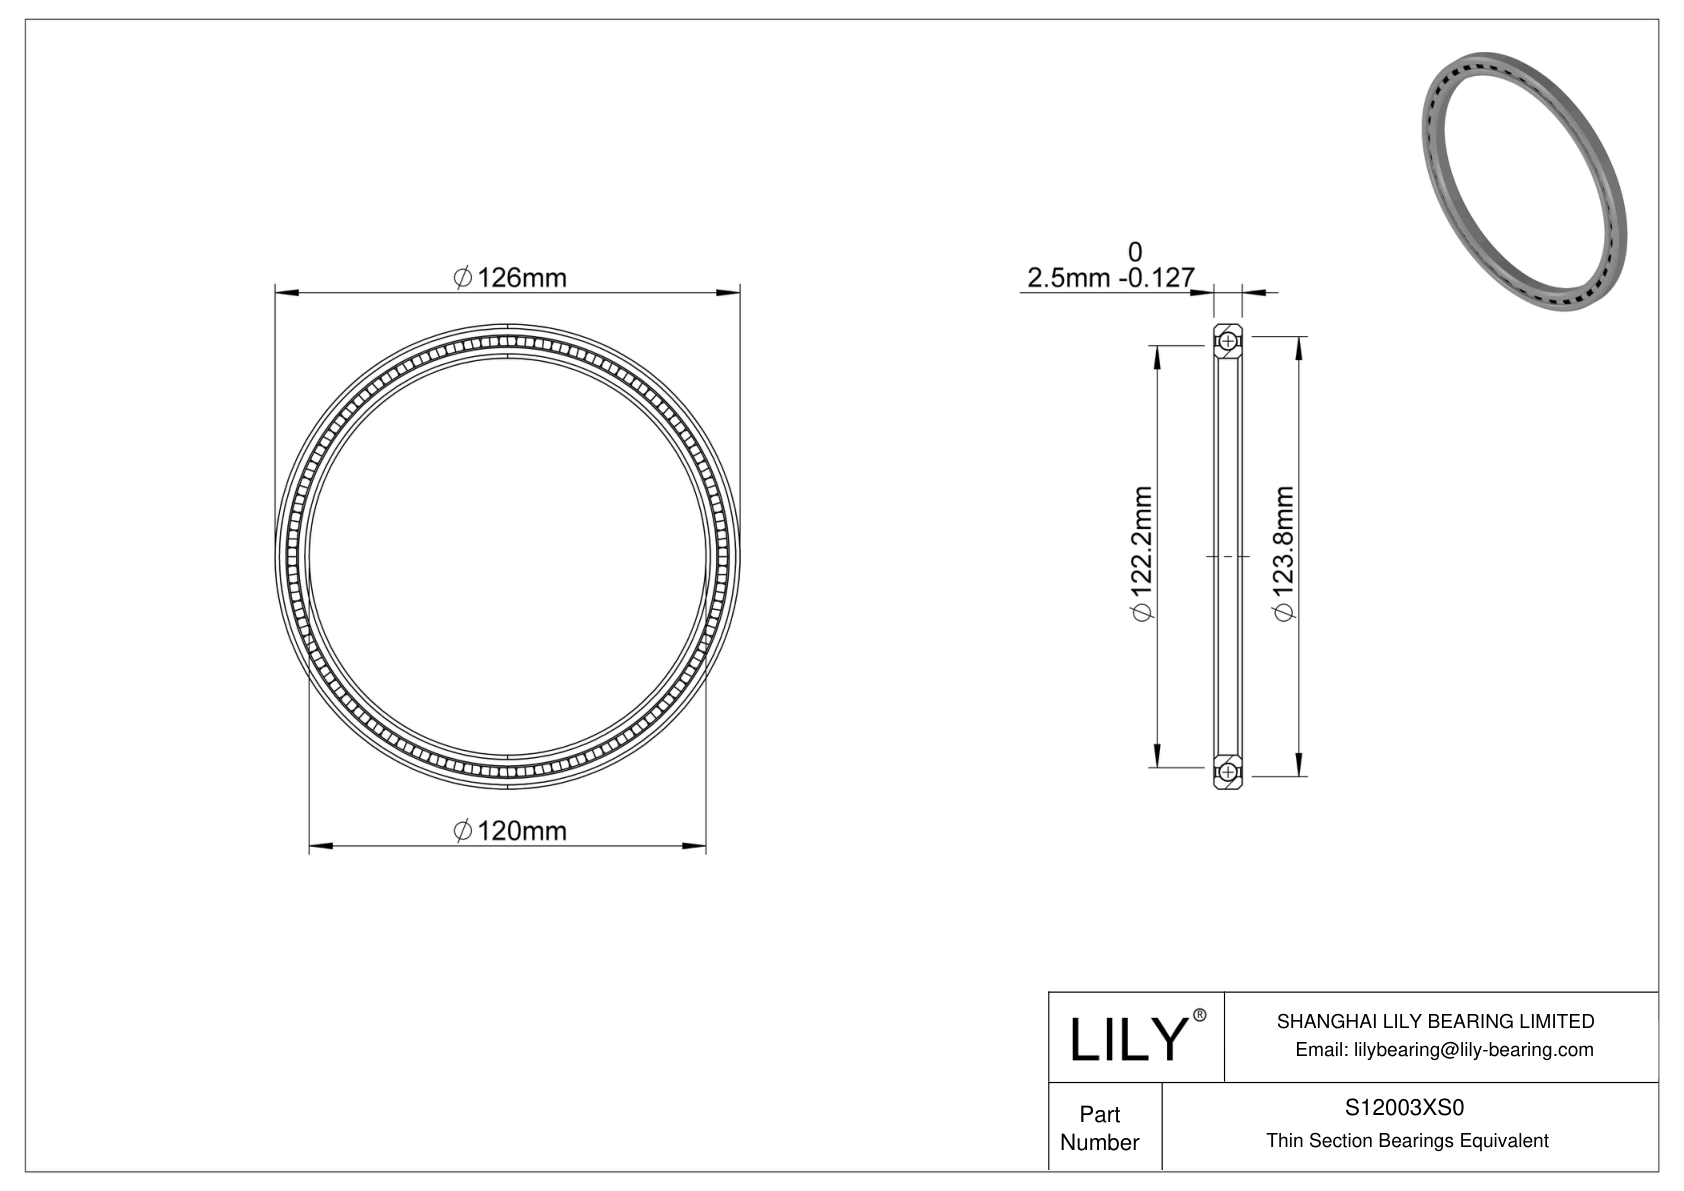 S12003XS0 Constant Section (CS) Bearings cad drawing